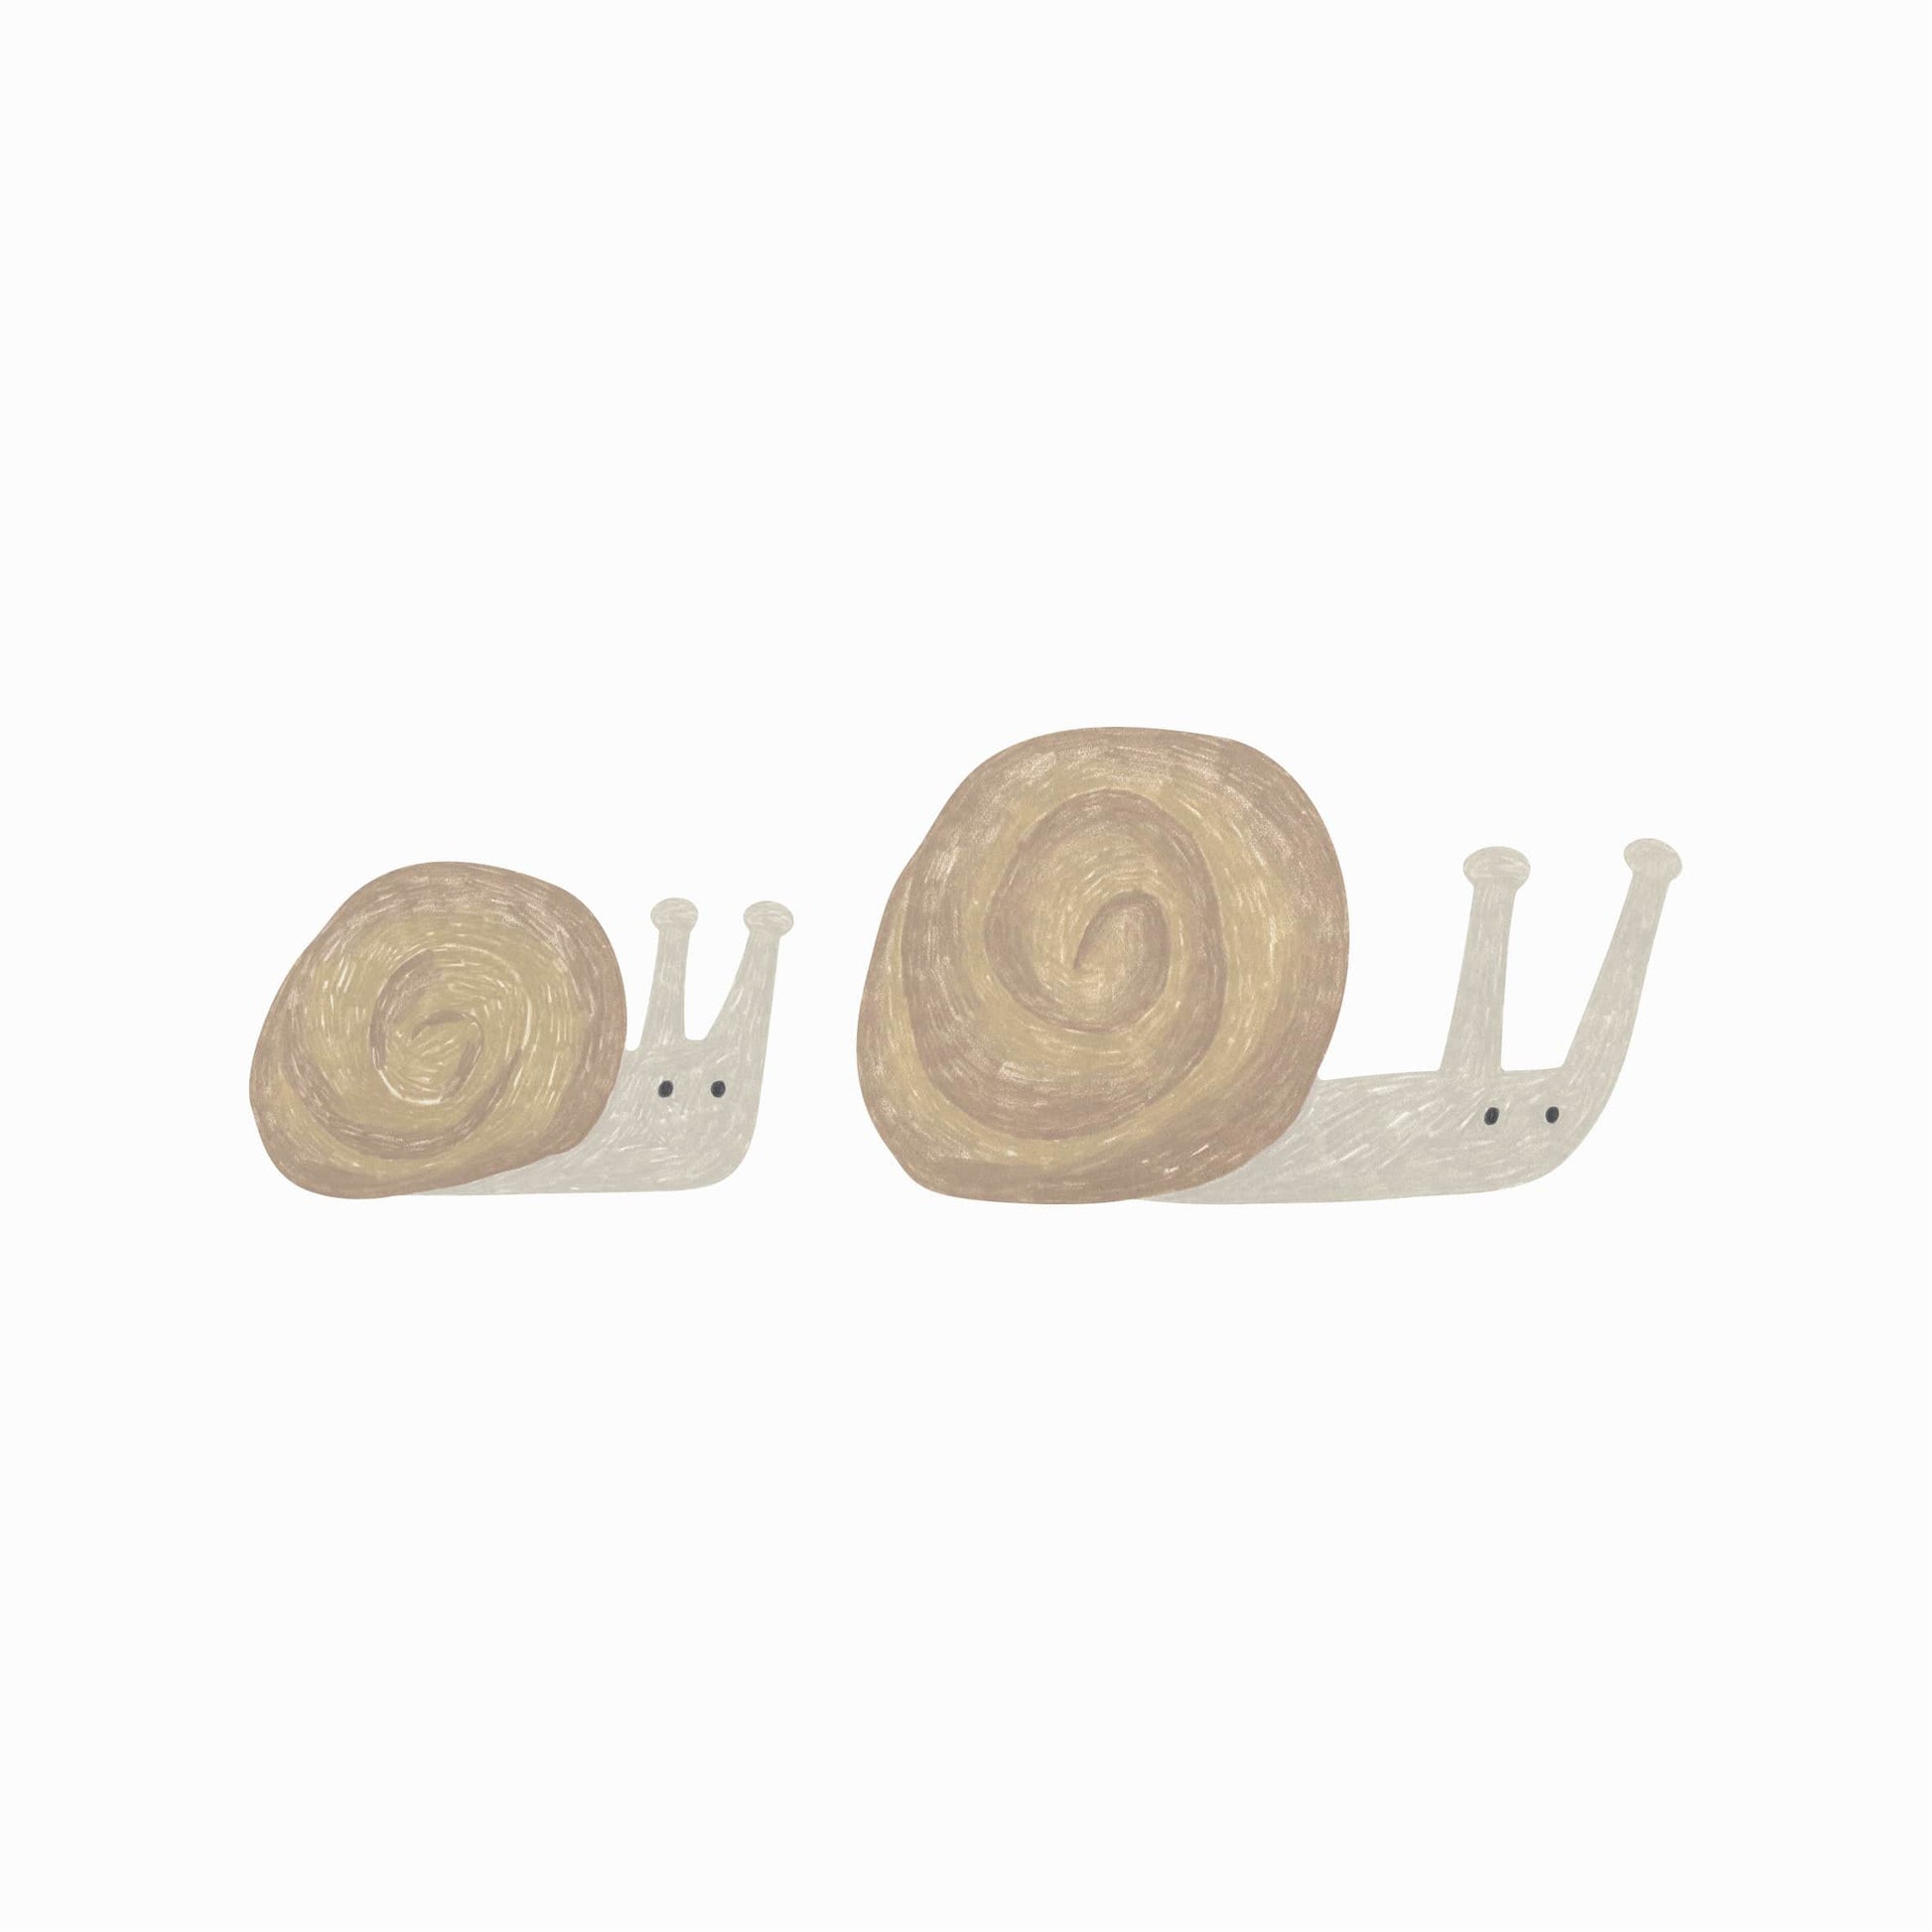 Image showing the 2 snail stickers snails are grey with brown shells and the front snail is larger than the back one.